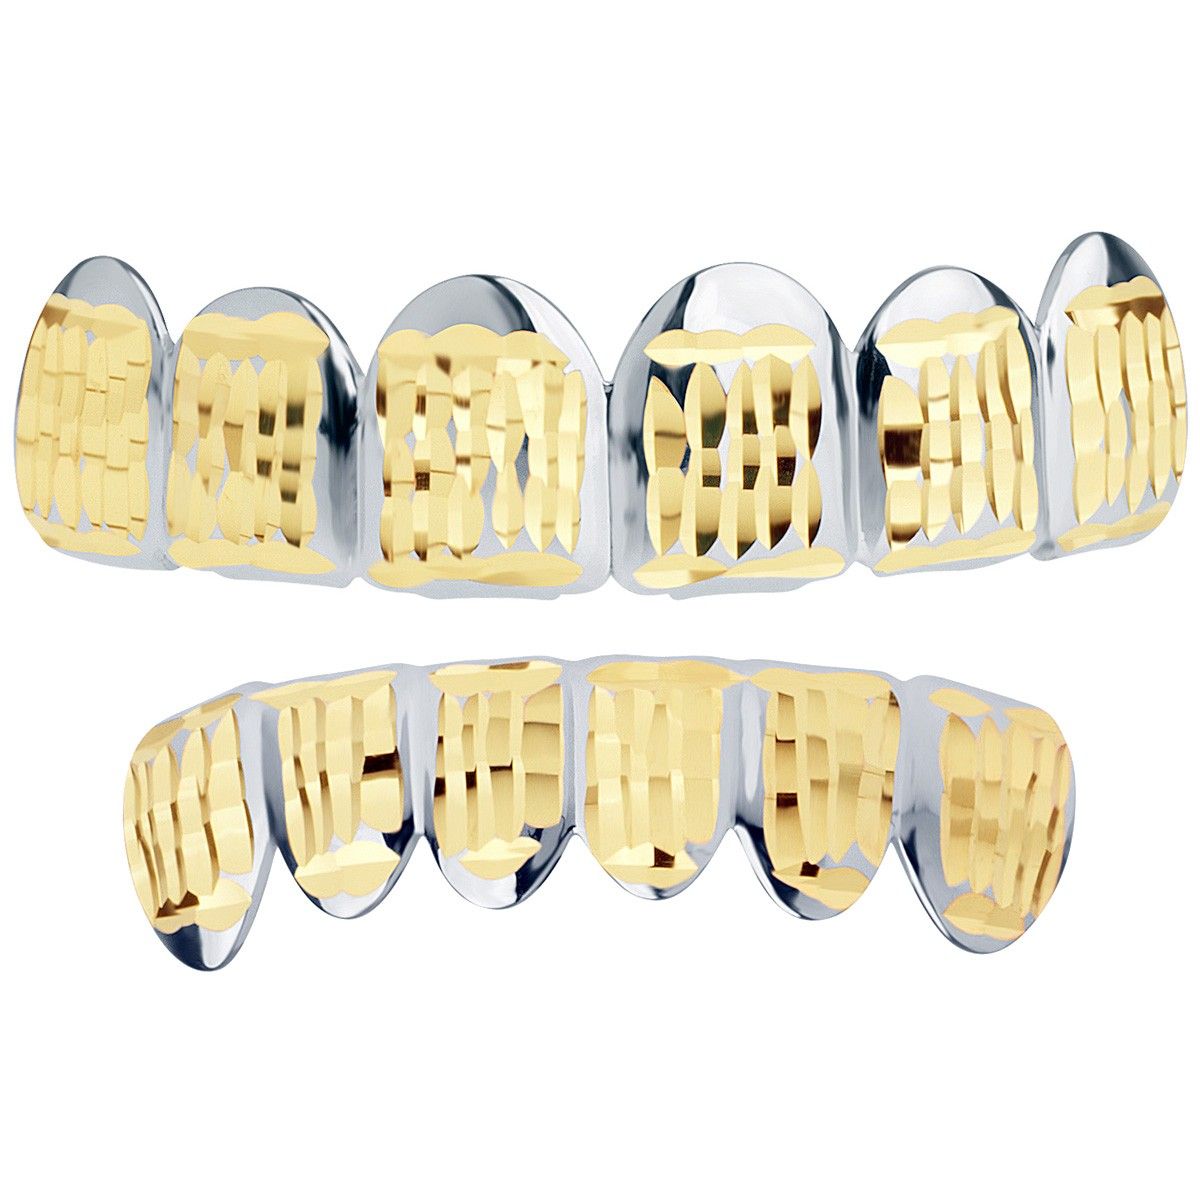 Silber Grillz – One size fits all – Diamond Cut ONE – SET